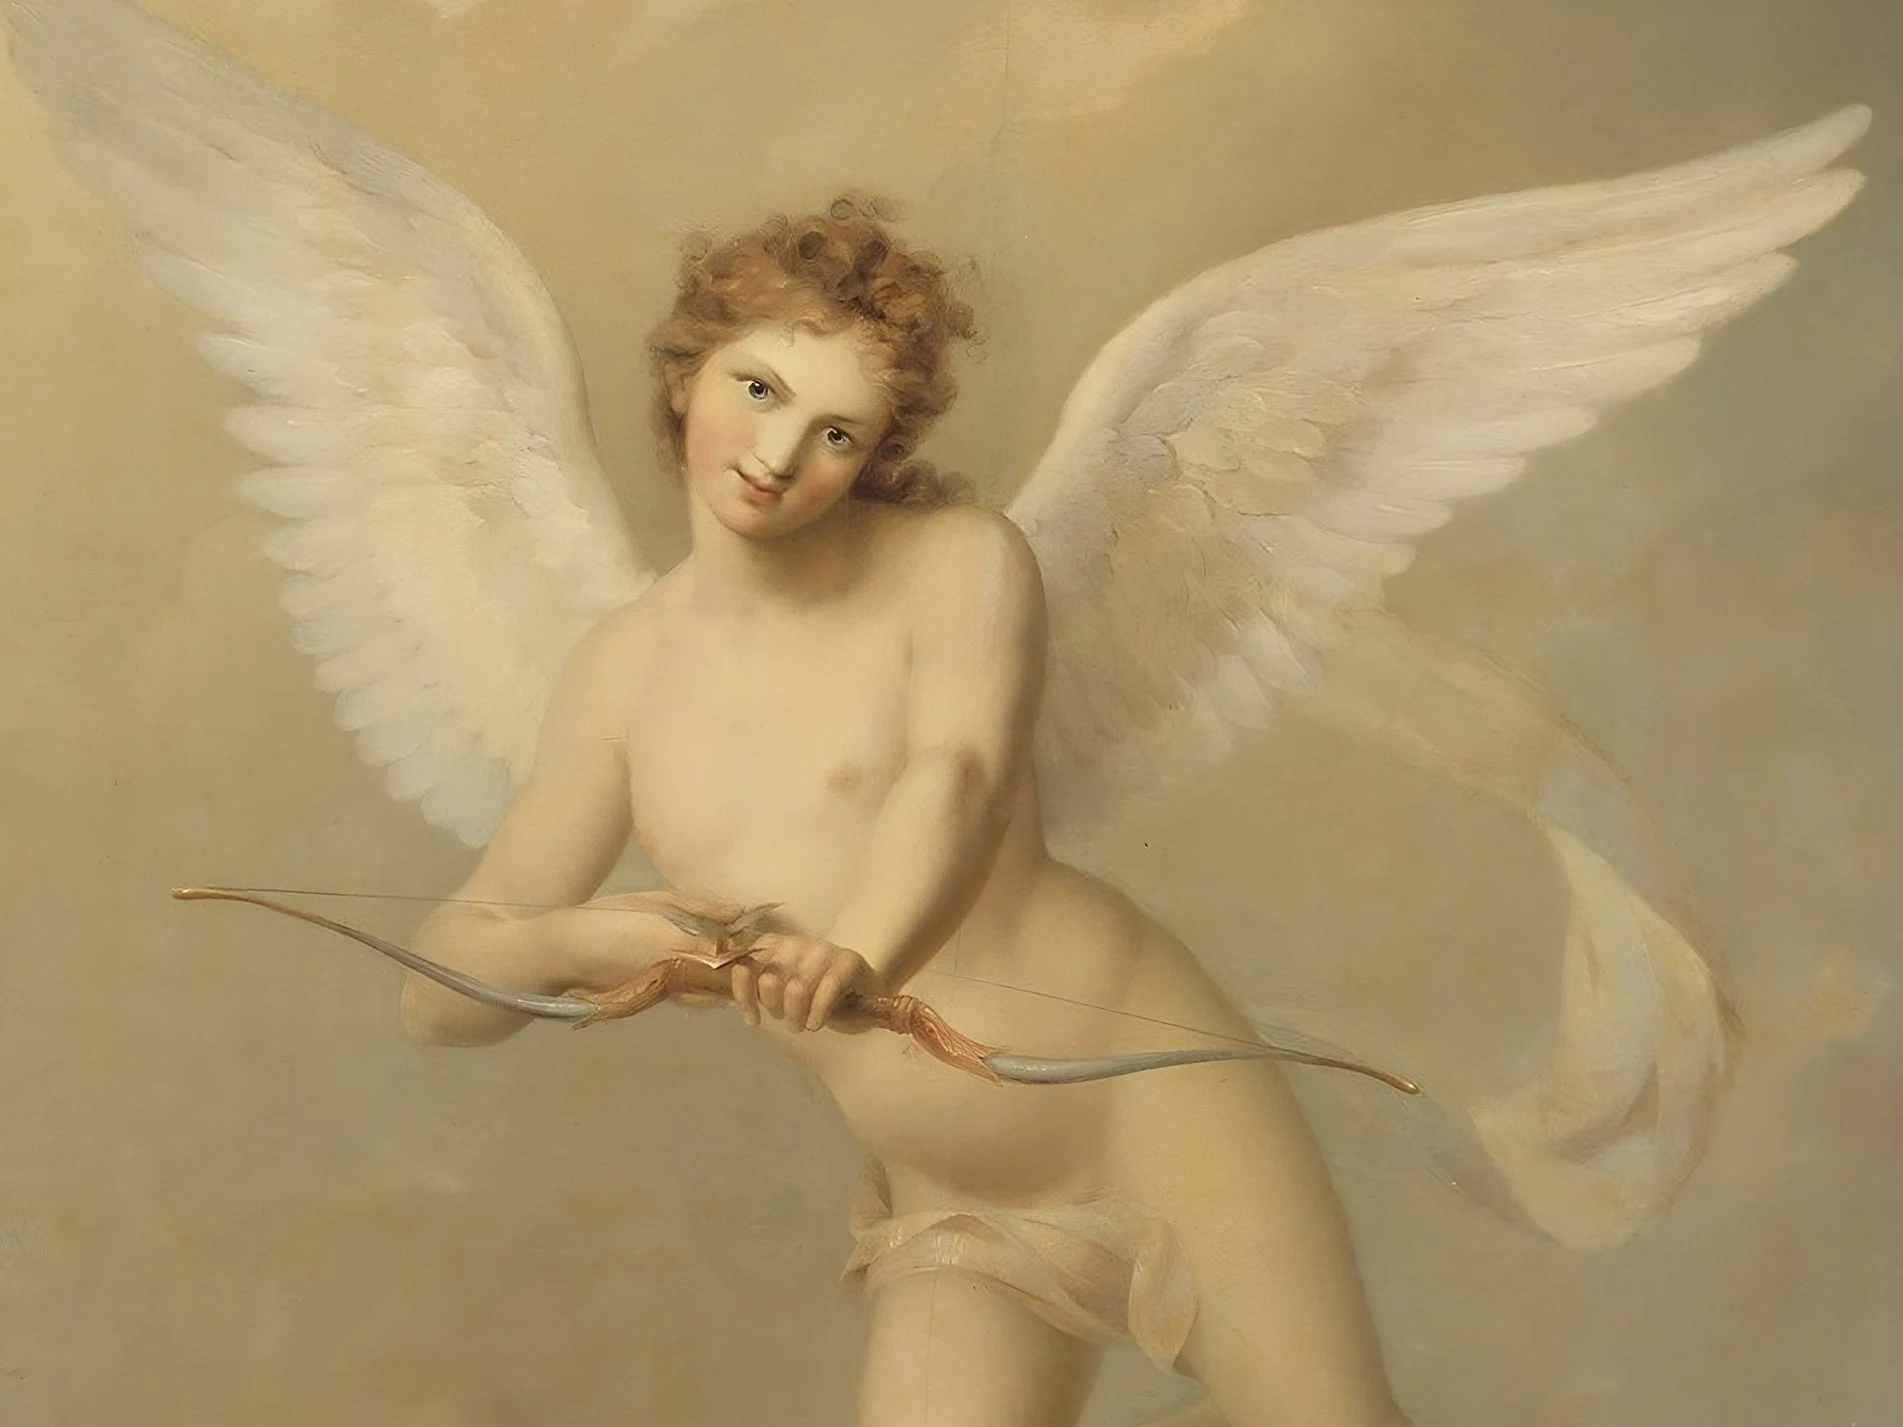 'Cupid' (1807), painting by Fredric Westin